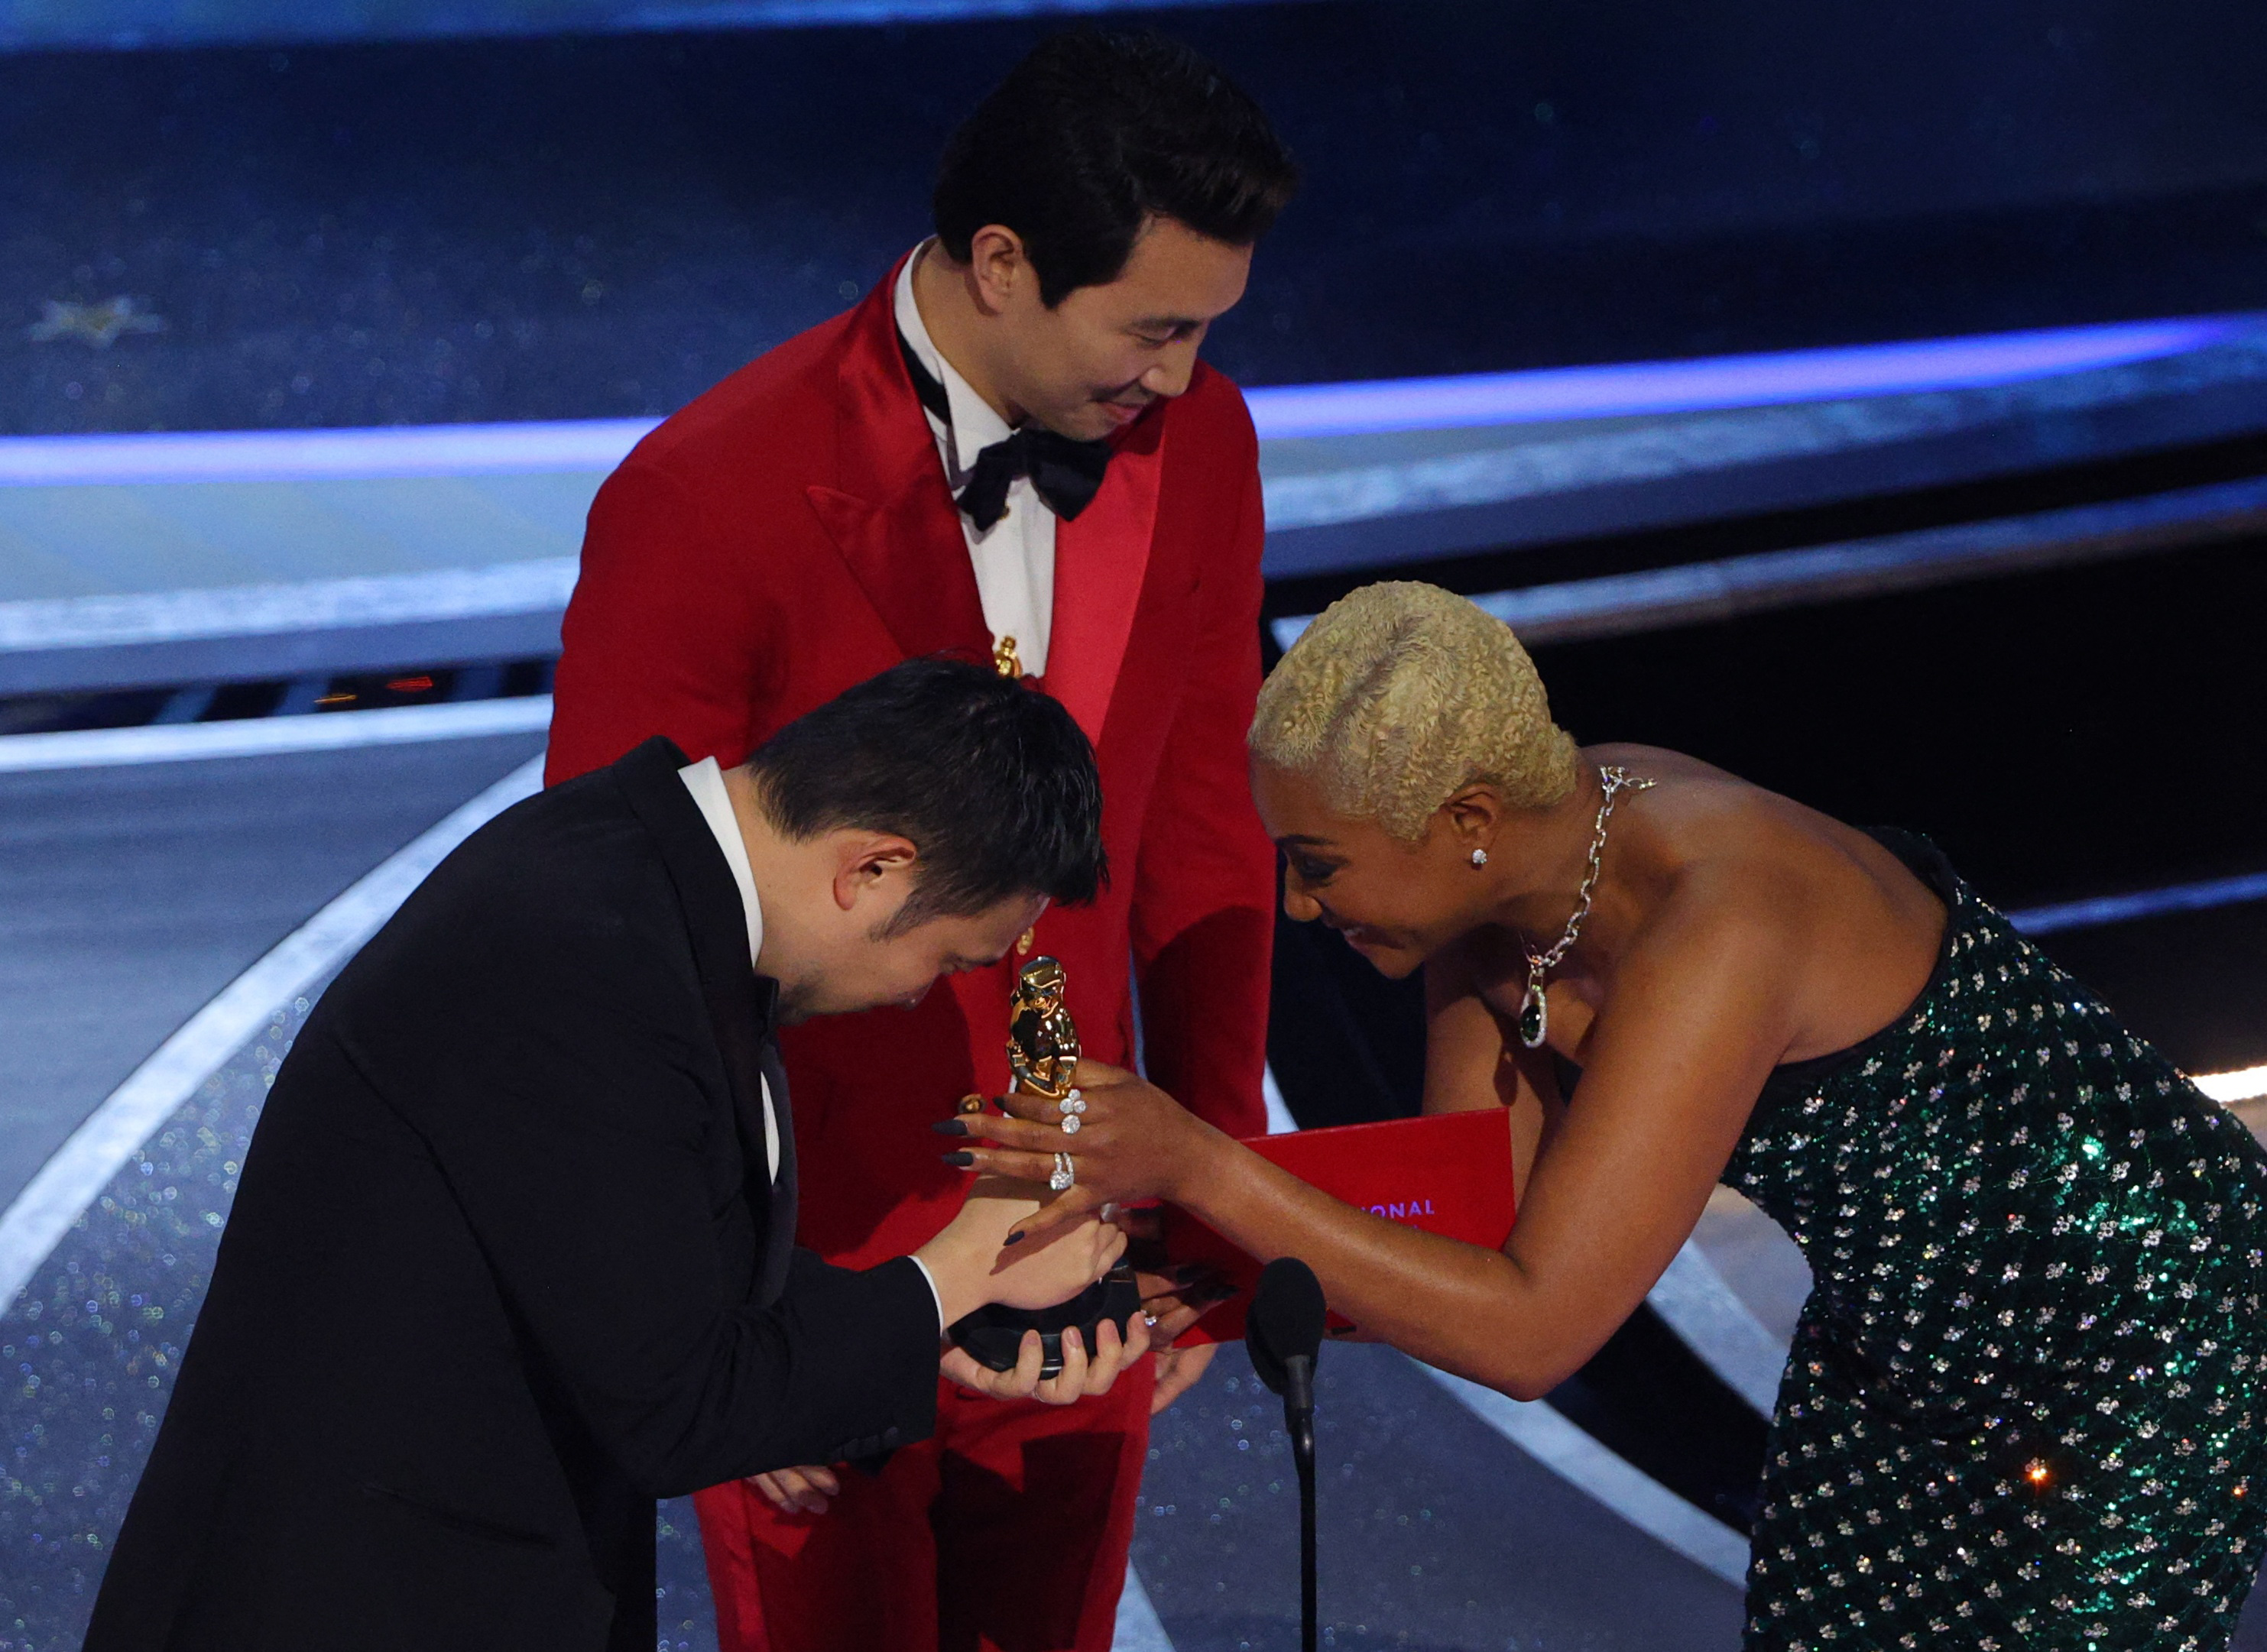 Ryusuke Hamaguchi received the Oscar for best international feature film for "drive my car" (Reuters/Brian Snyder)